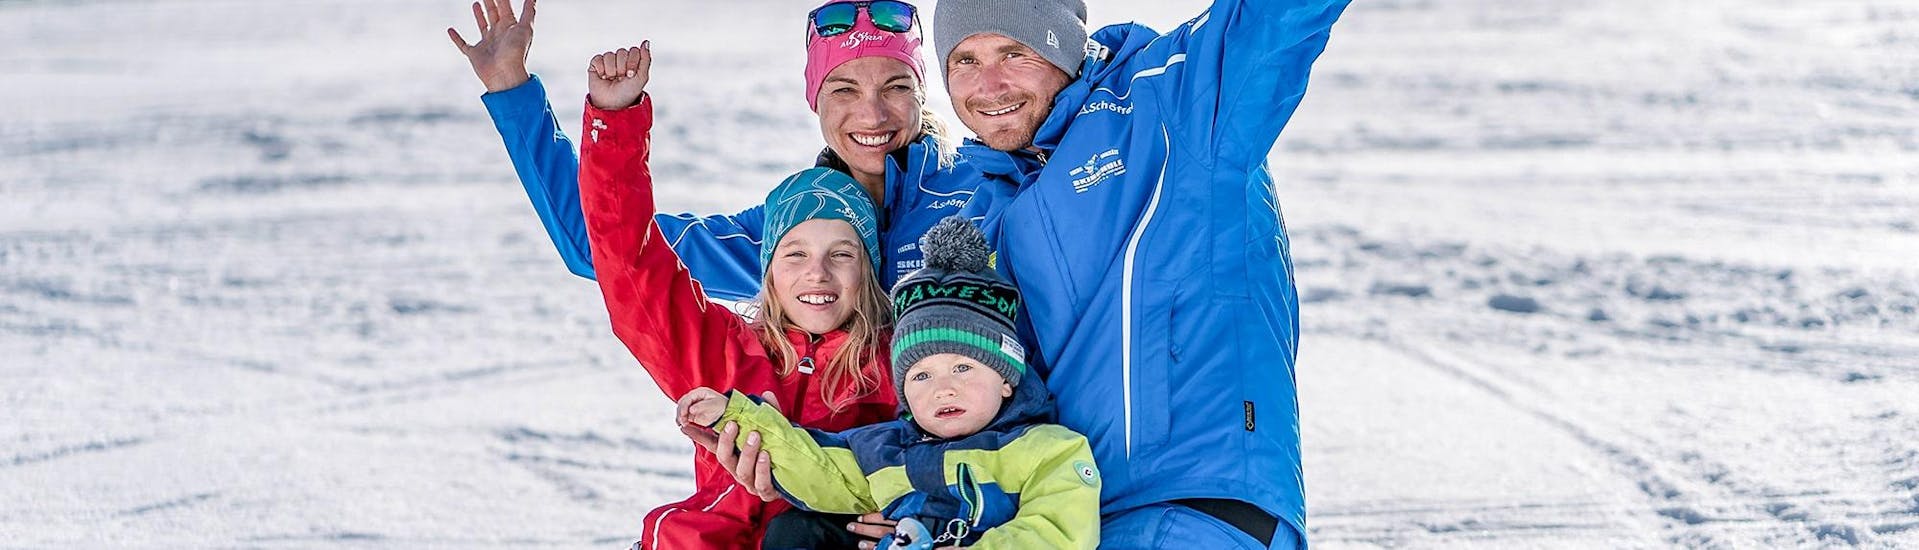 Private Ski Lessons for Families for All Levels.